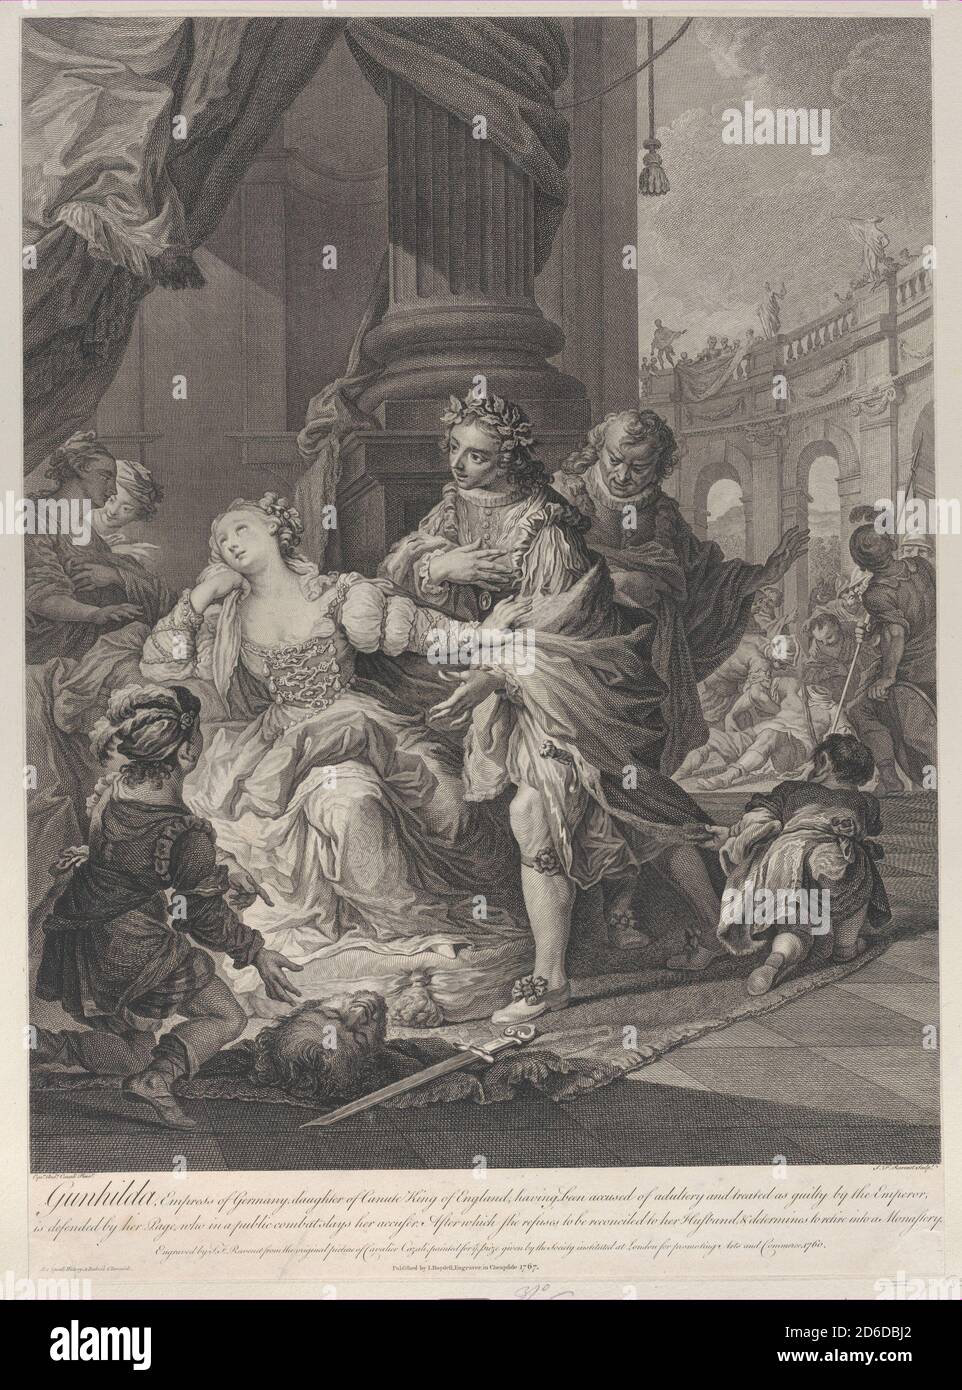 Gunhilda accused of adultery, 1760. [Gunhilda, Empress of Germany, daughter of Canute King of England, having been accused of adultery and treated as guilty by the Emperor, is defended by her Page, who in a public combat slays her accuser. After which she refuses to be reconciled to her Husband, &amp; determines to retire into a Monastery]. Stock Photo